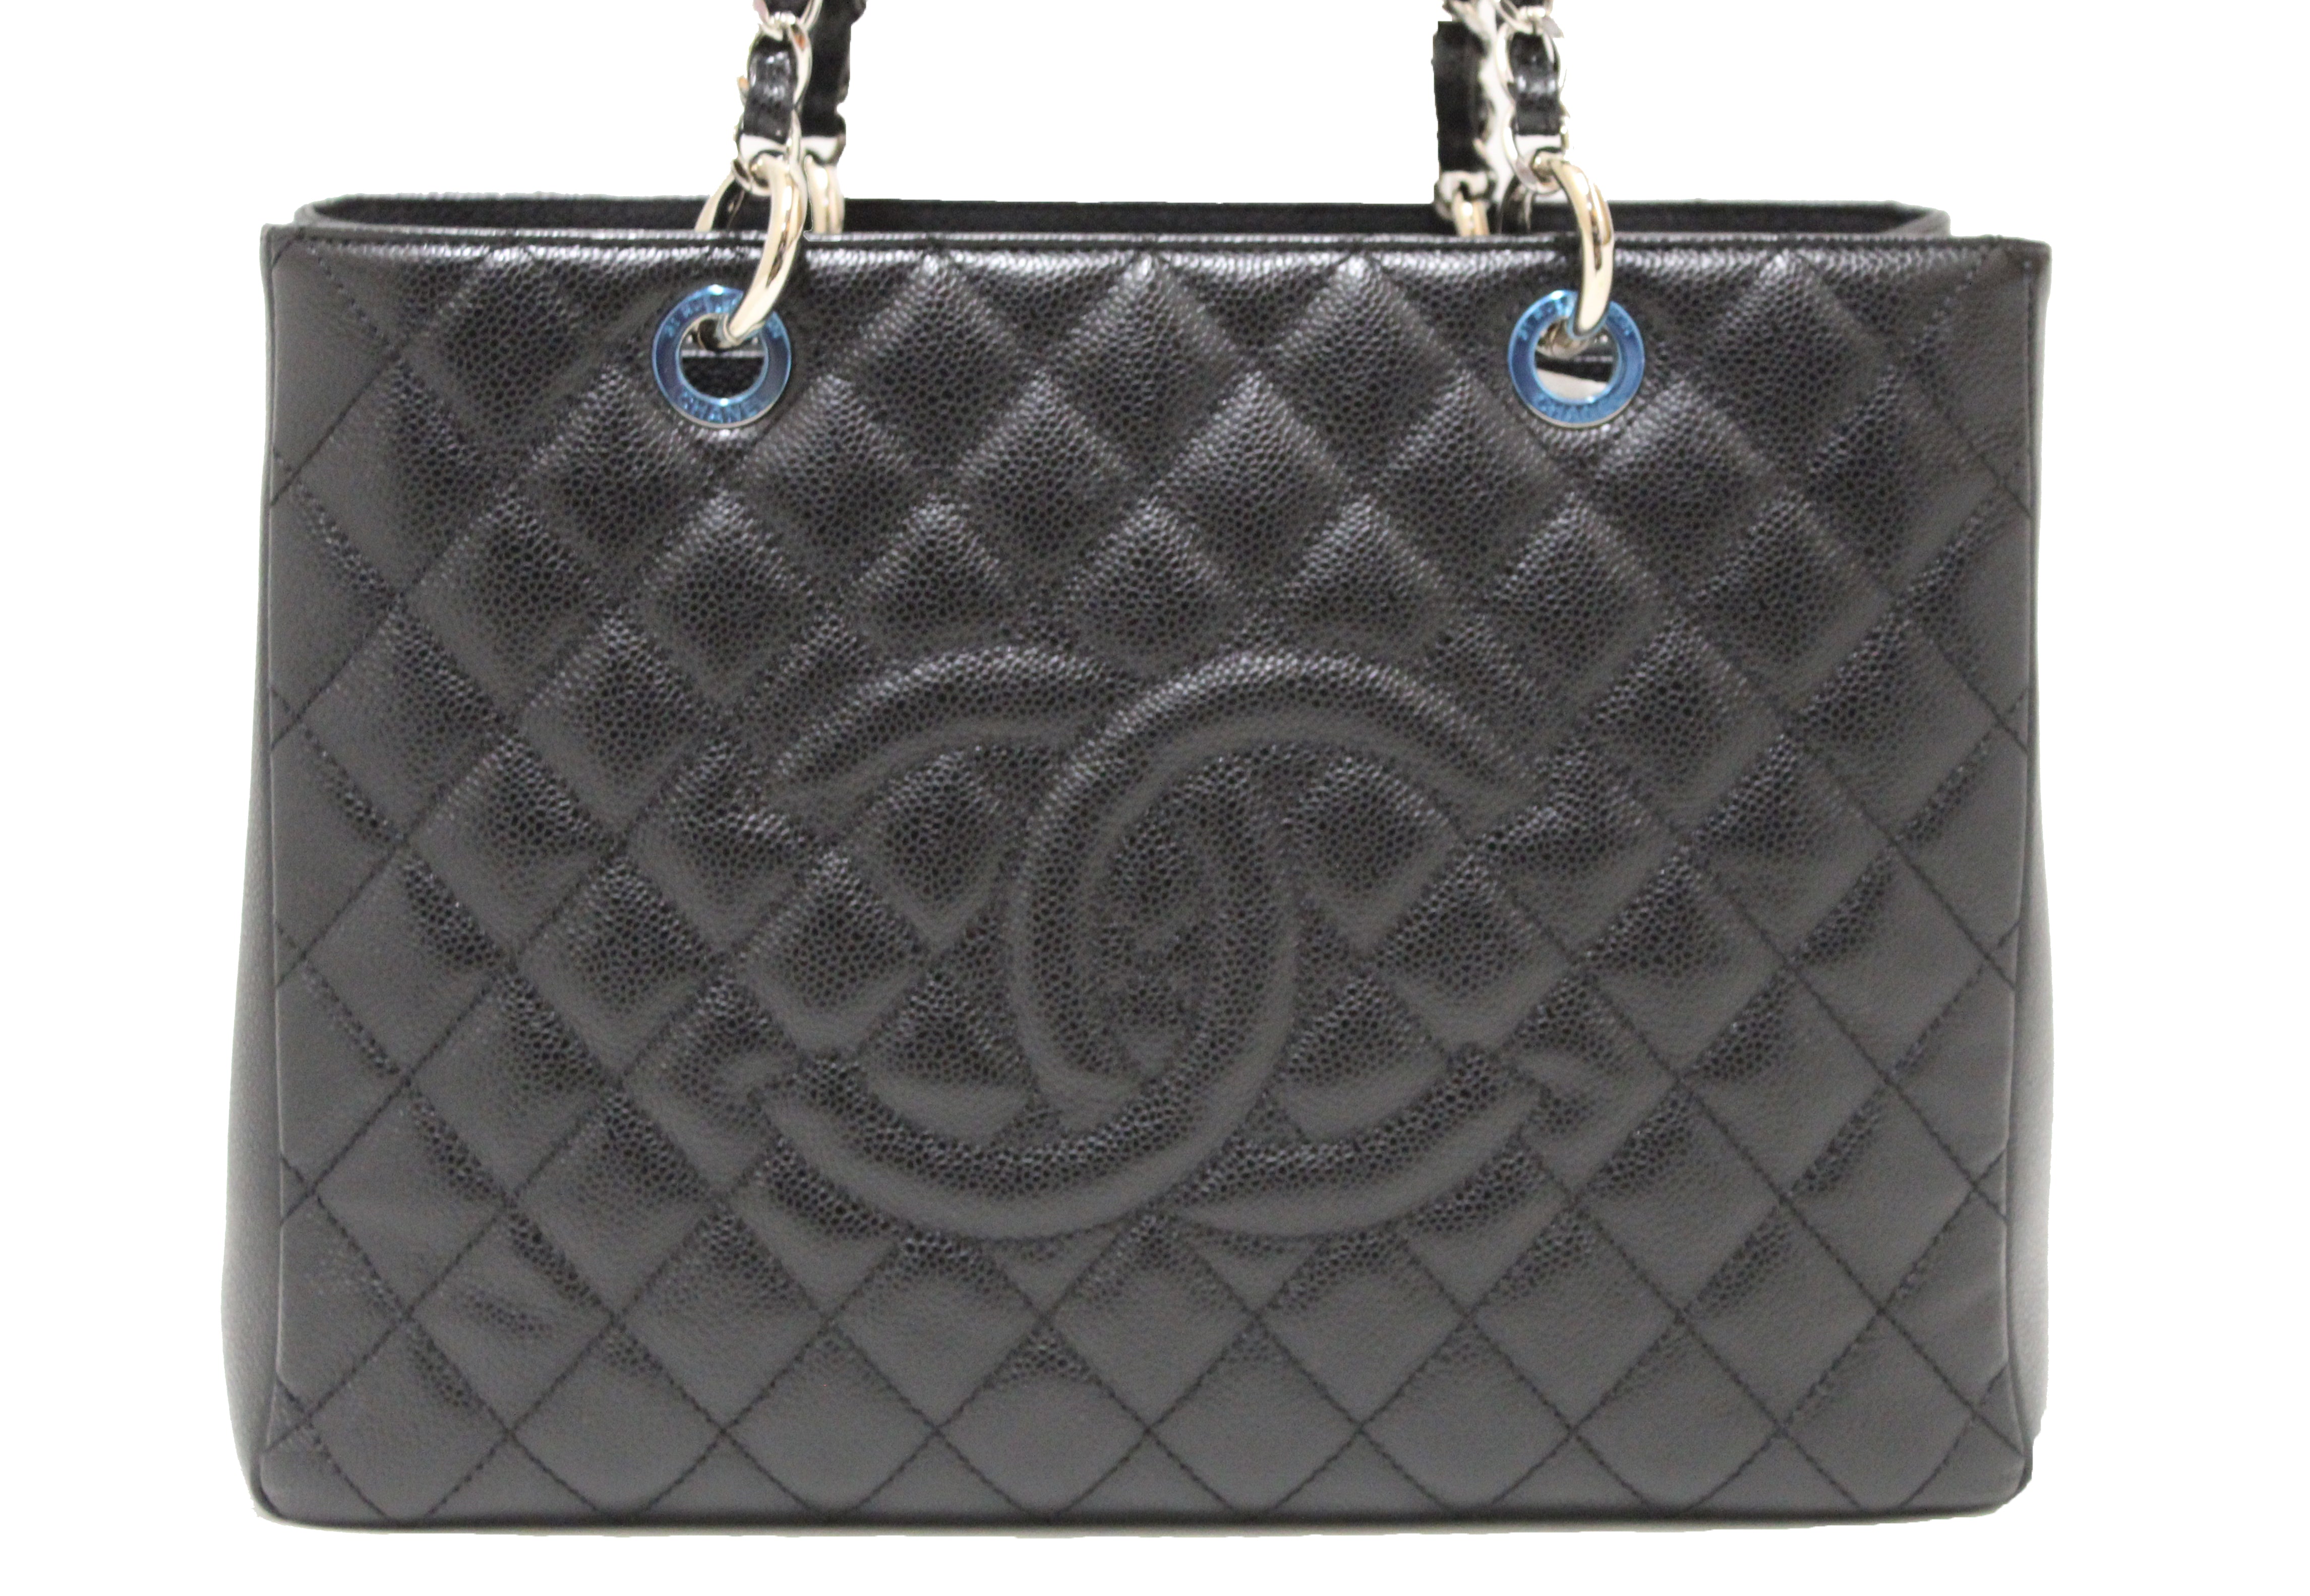 Authentic New Chanel Black Caviar Leather GST Grand Shopping Tote